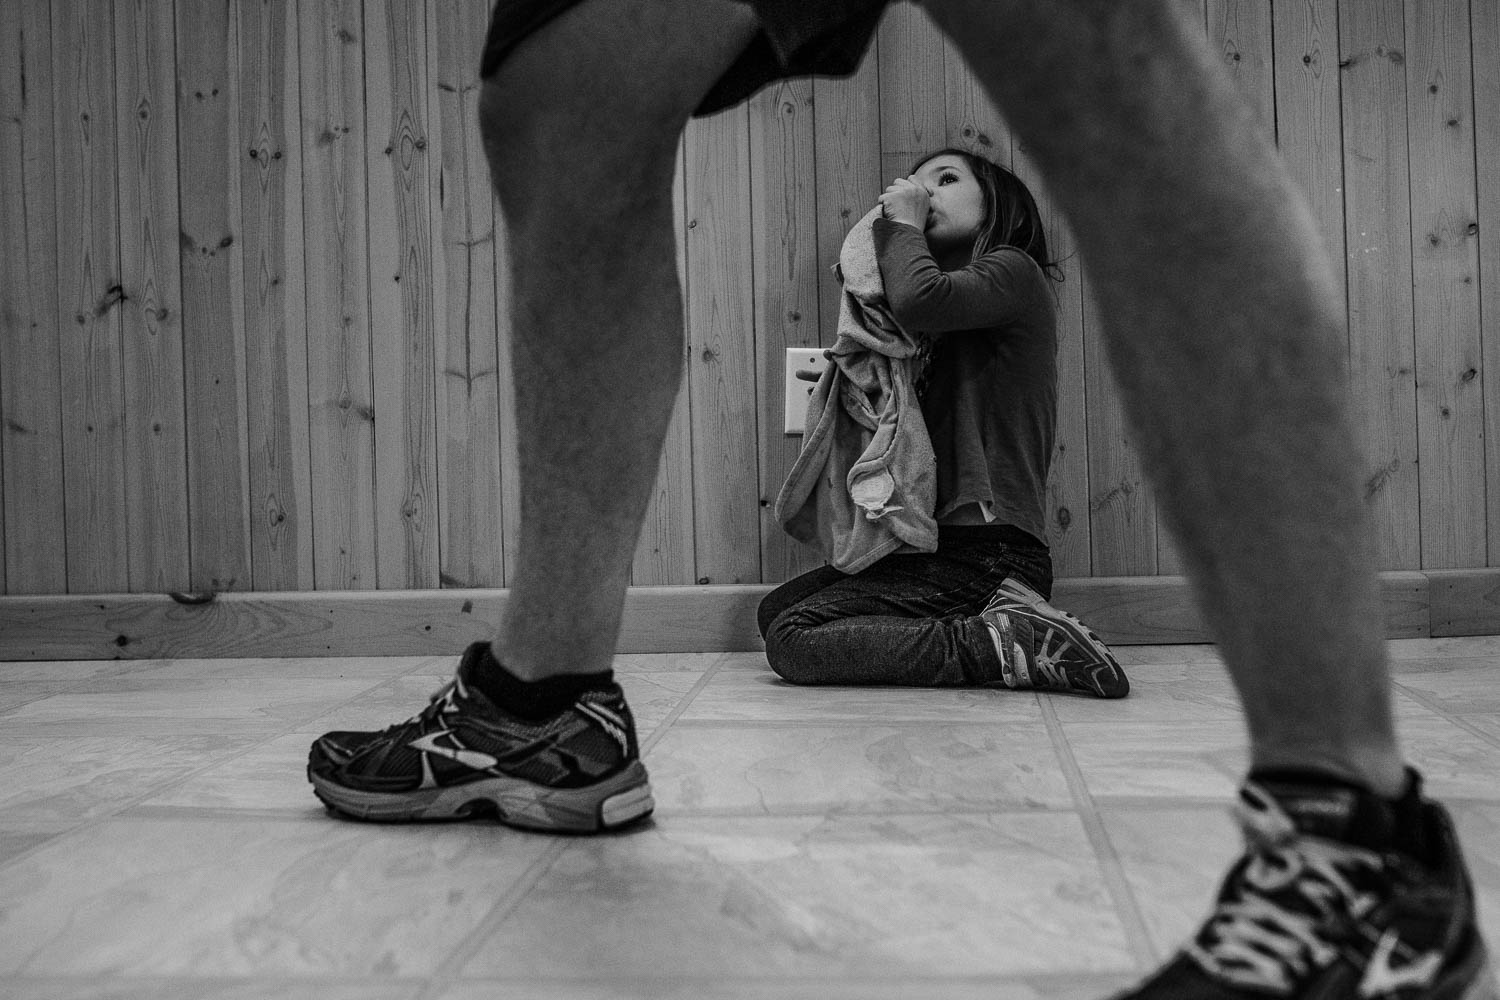 Girl sitting by wall photographed through father's legs.